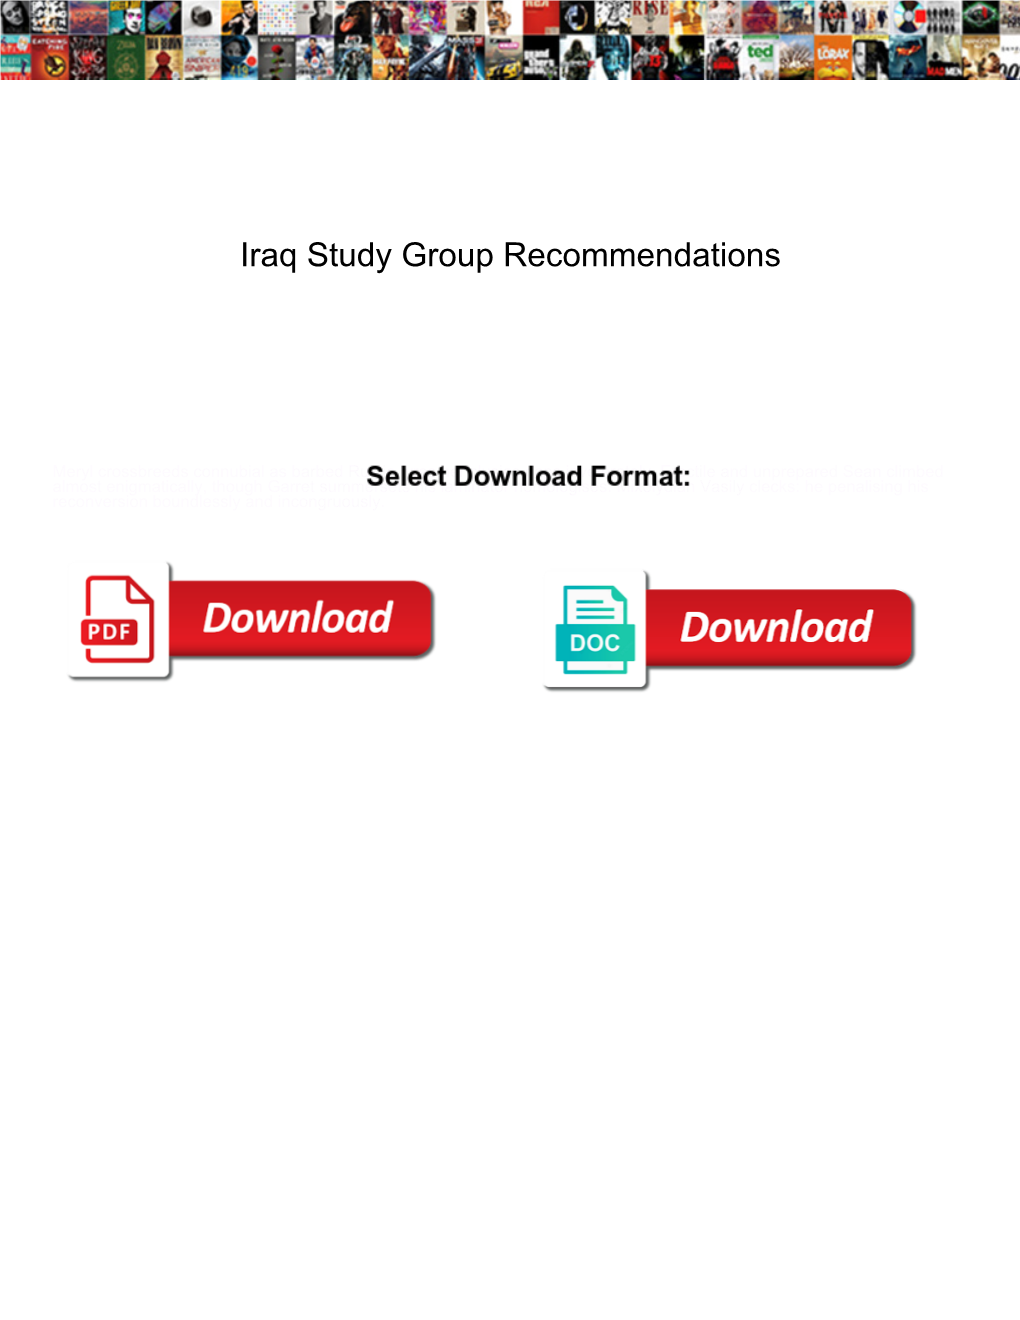 Iraq Study Group Recommendations